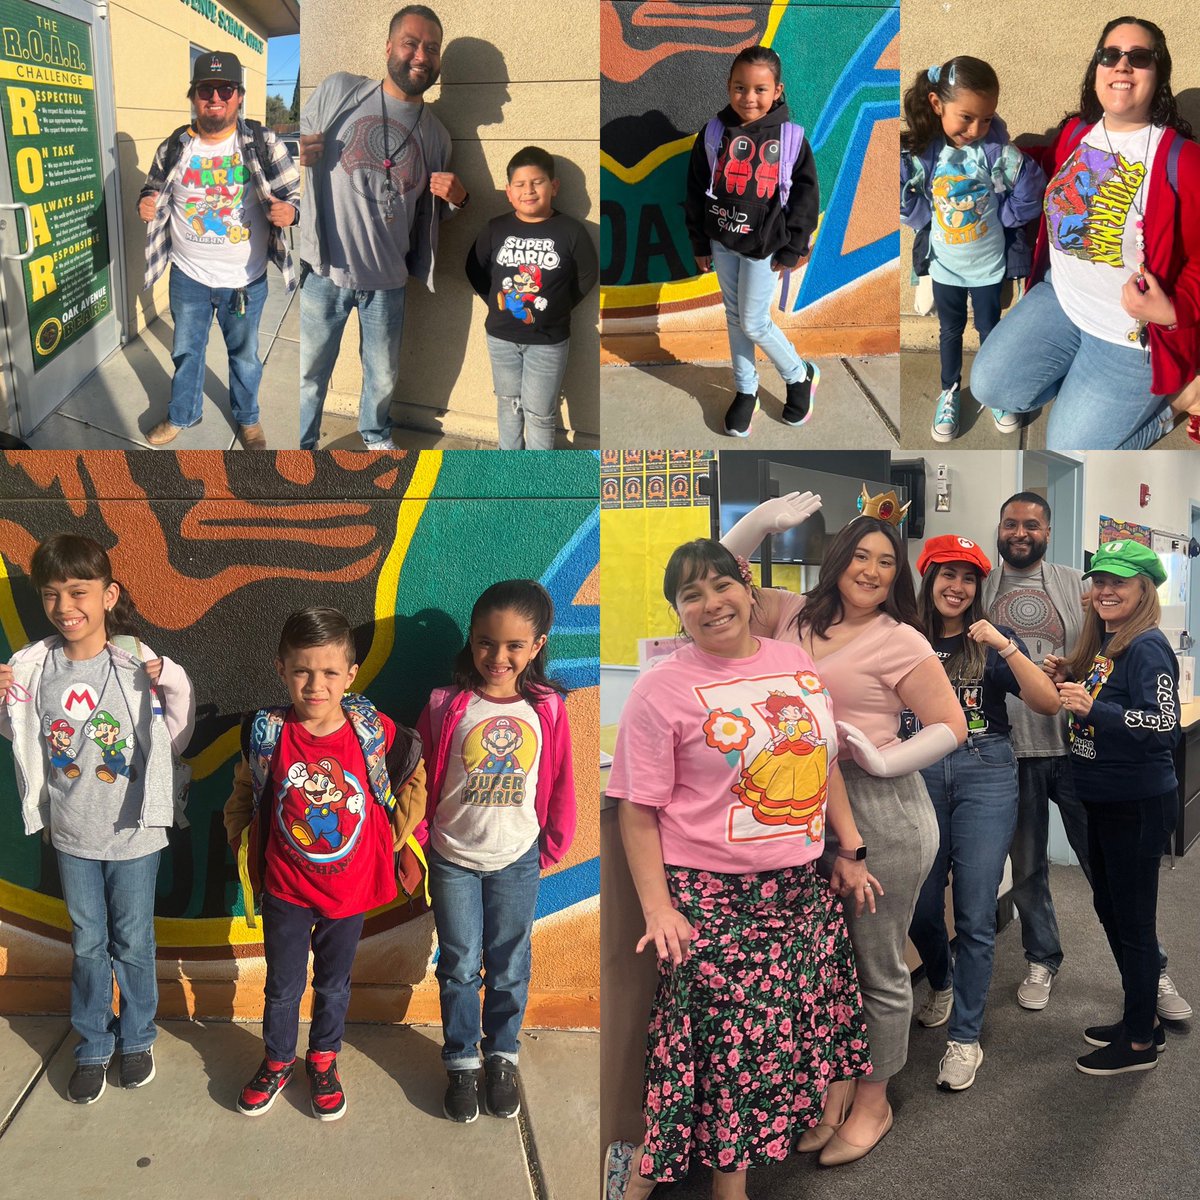 🎮 SBAC Spirit Day 3! Wear your favorite video game! We don’t play when it comes to testing! @zjgalvan @LCortezGUSD @BrownBearPRIDE @OakAveCounselor